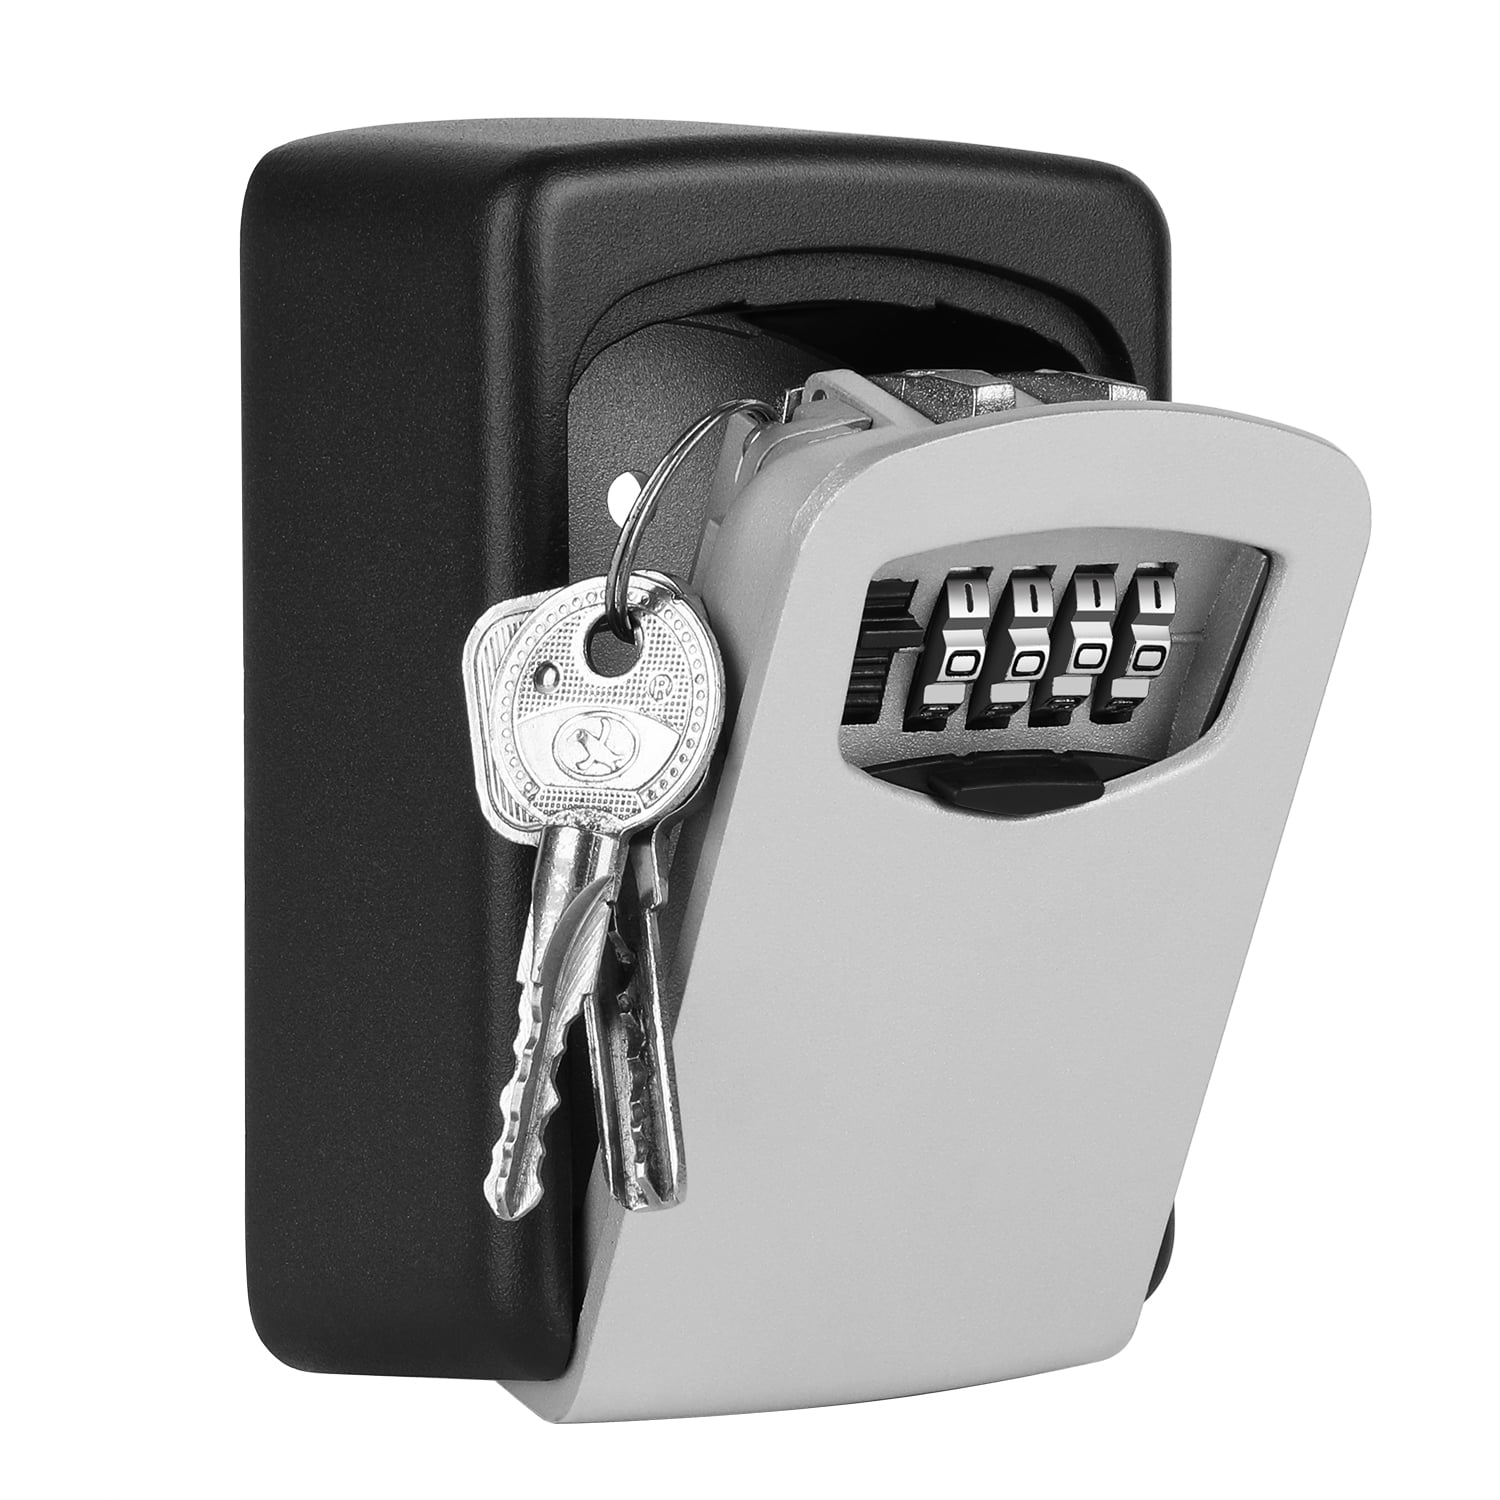 Wall Mounted 4 Digit Outdoor Home Security Key Safe Box Code Secure Lock Storage 